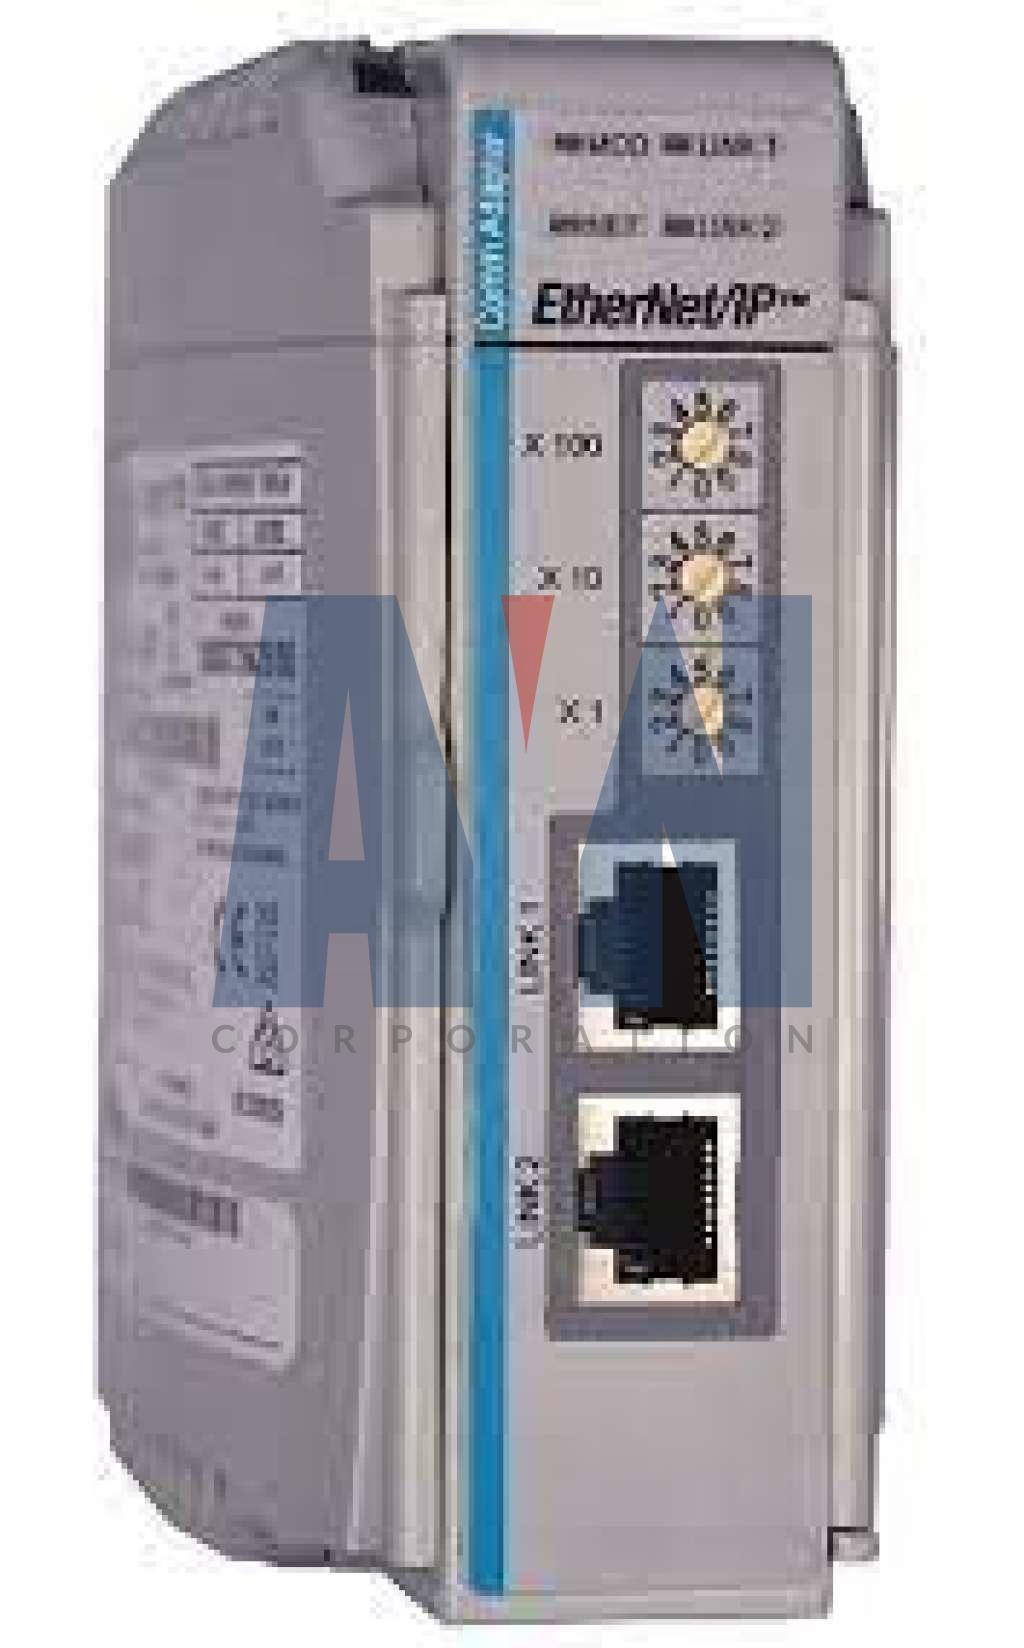 ALLEN BRADLEY 1769-AENTR COMMUNICATIONS ADAPTER MODULE DISTRIBUTED I/O OVER ETHERNET/IP 24 VDC 500 MA 10/100 MBPS DUAL PORT